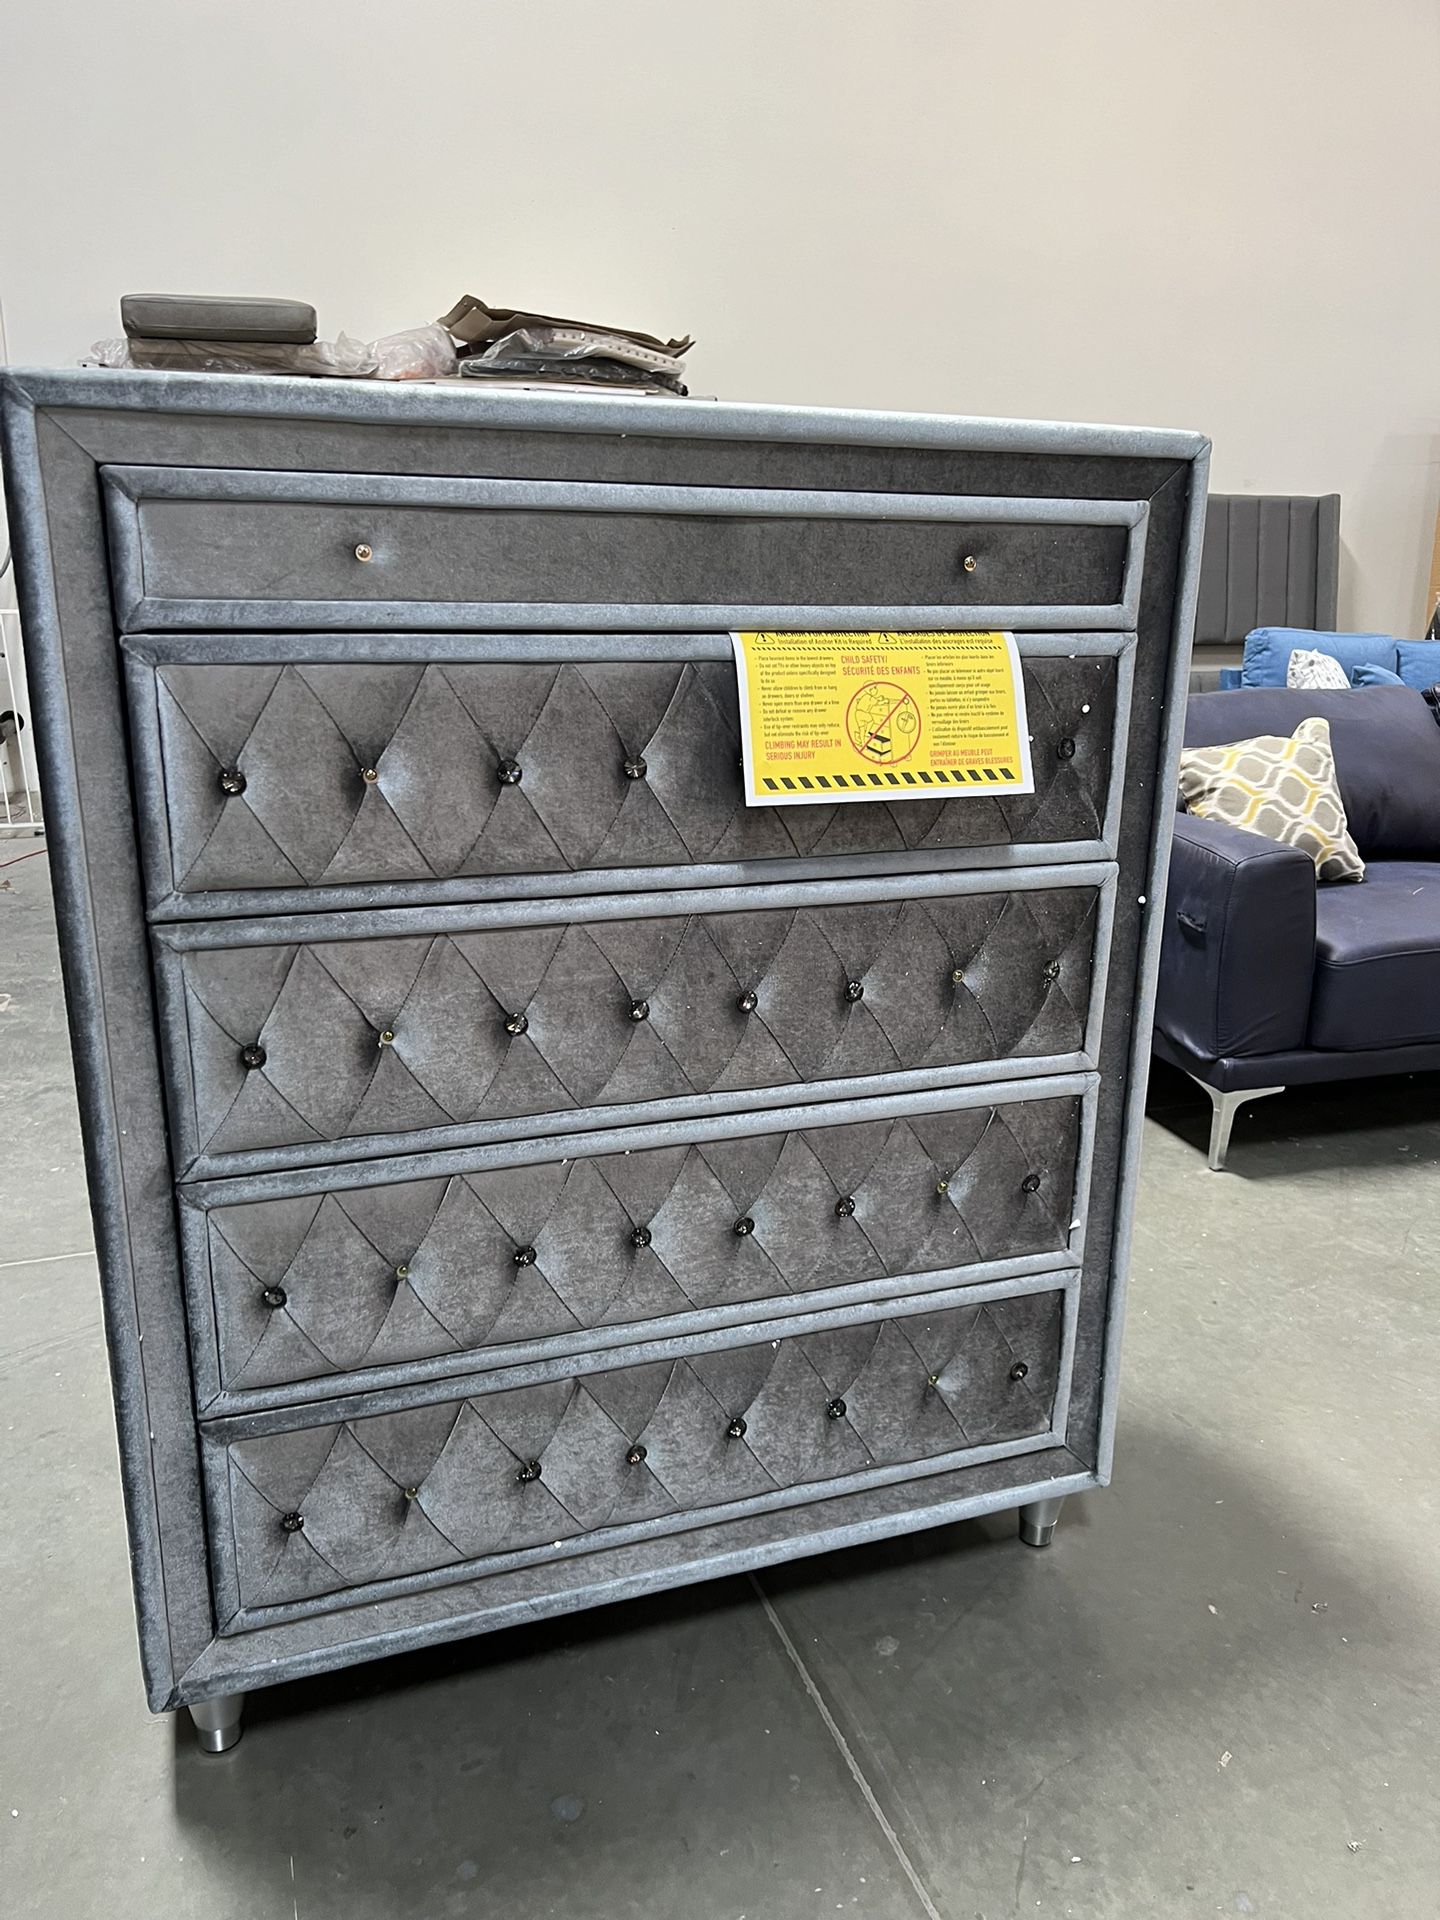 !!New!!!Gray 5-Drawer Chest, Tall Chest, Jeweled Knob Chest, Upholstered Chest, Dovetailed Drawer Design Chest, Dresser, Nightstand 